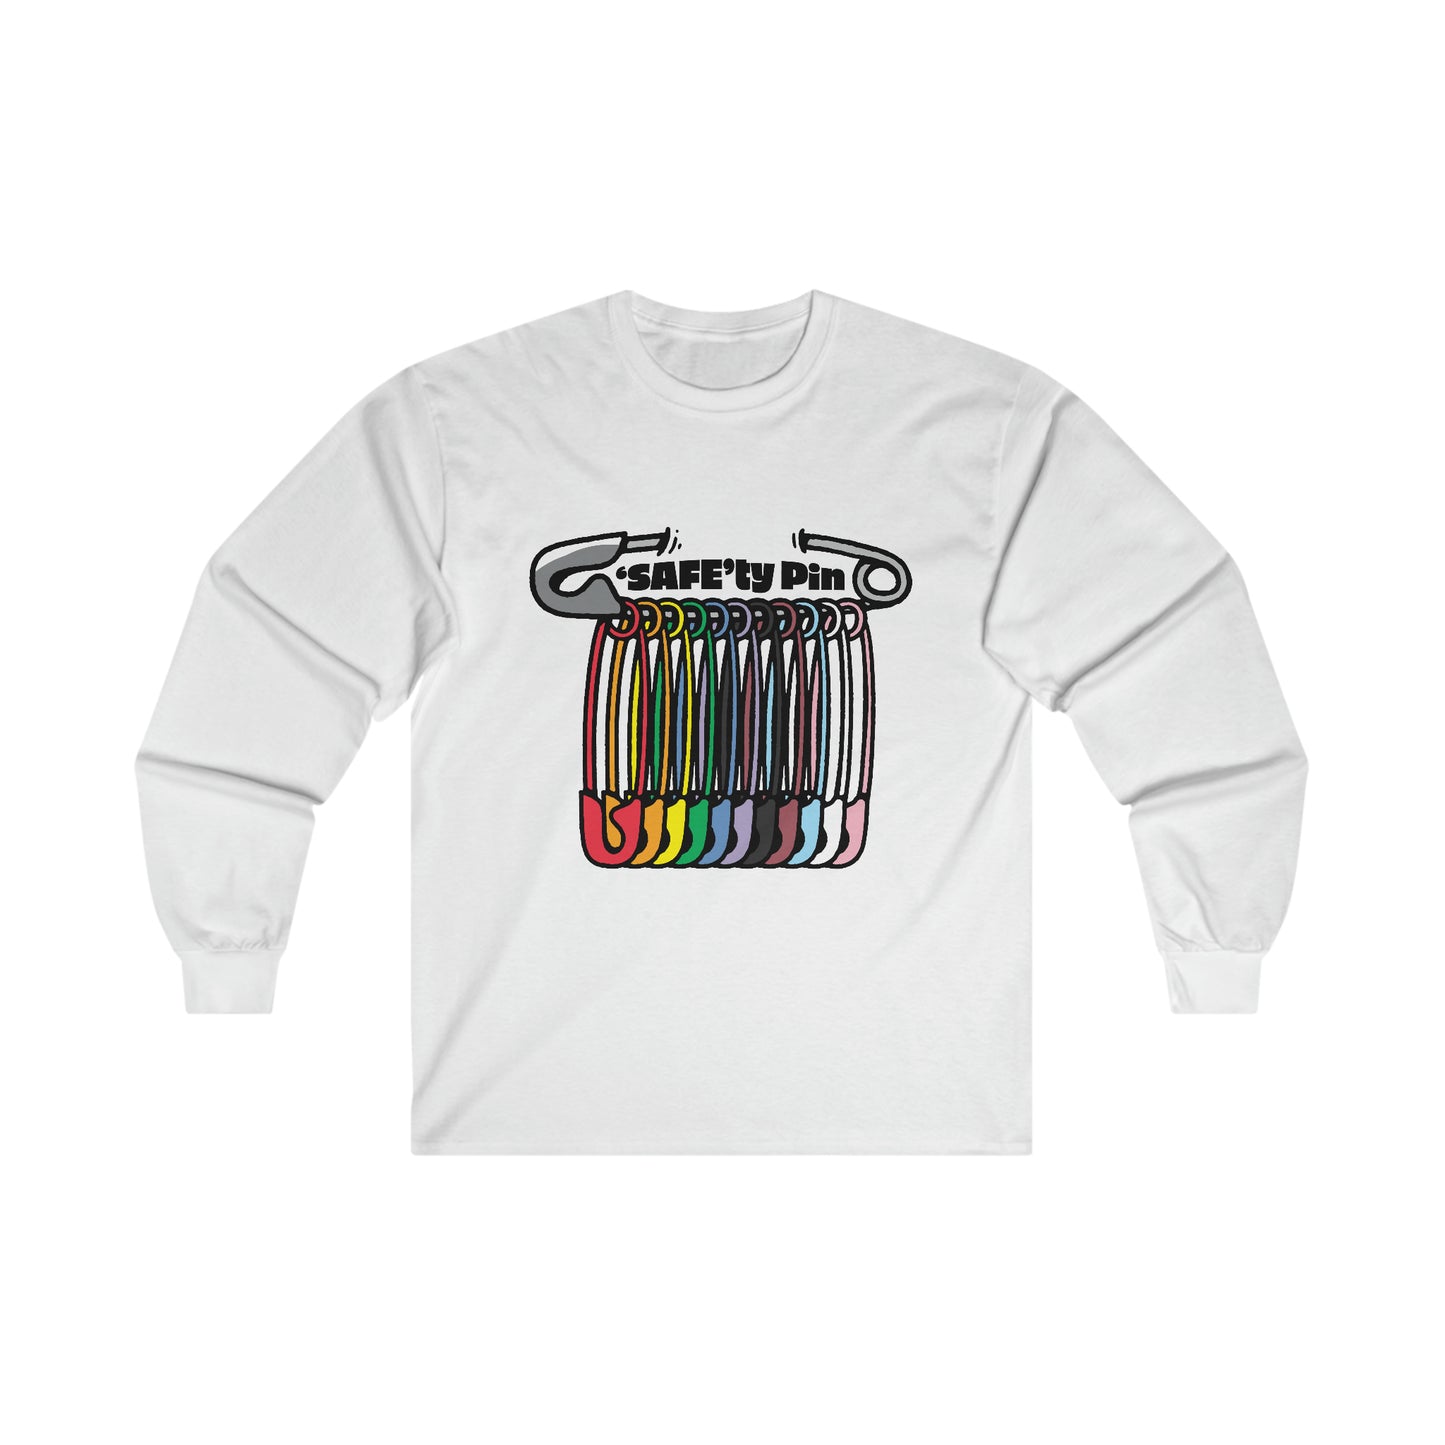 SAFEty Pin Long Sleeve Tee